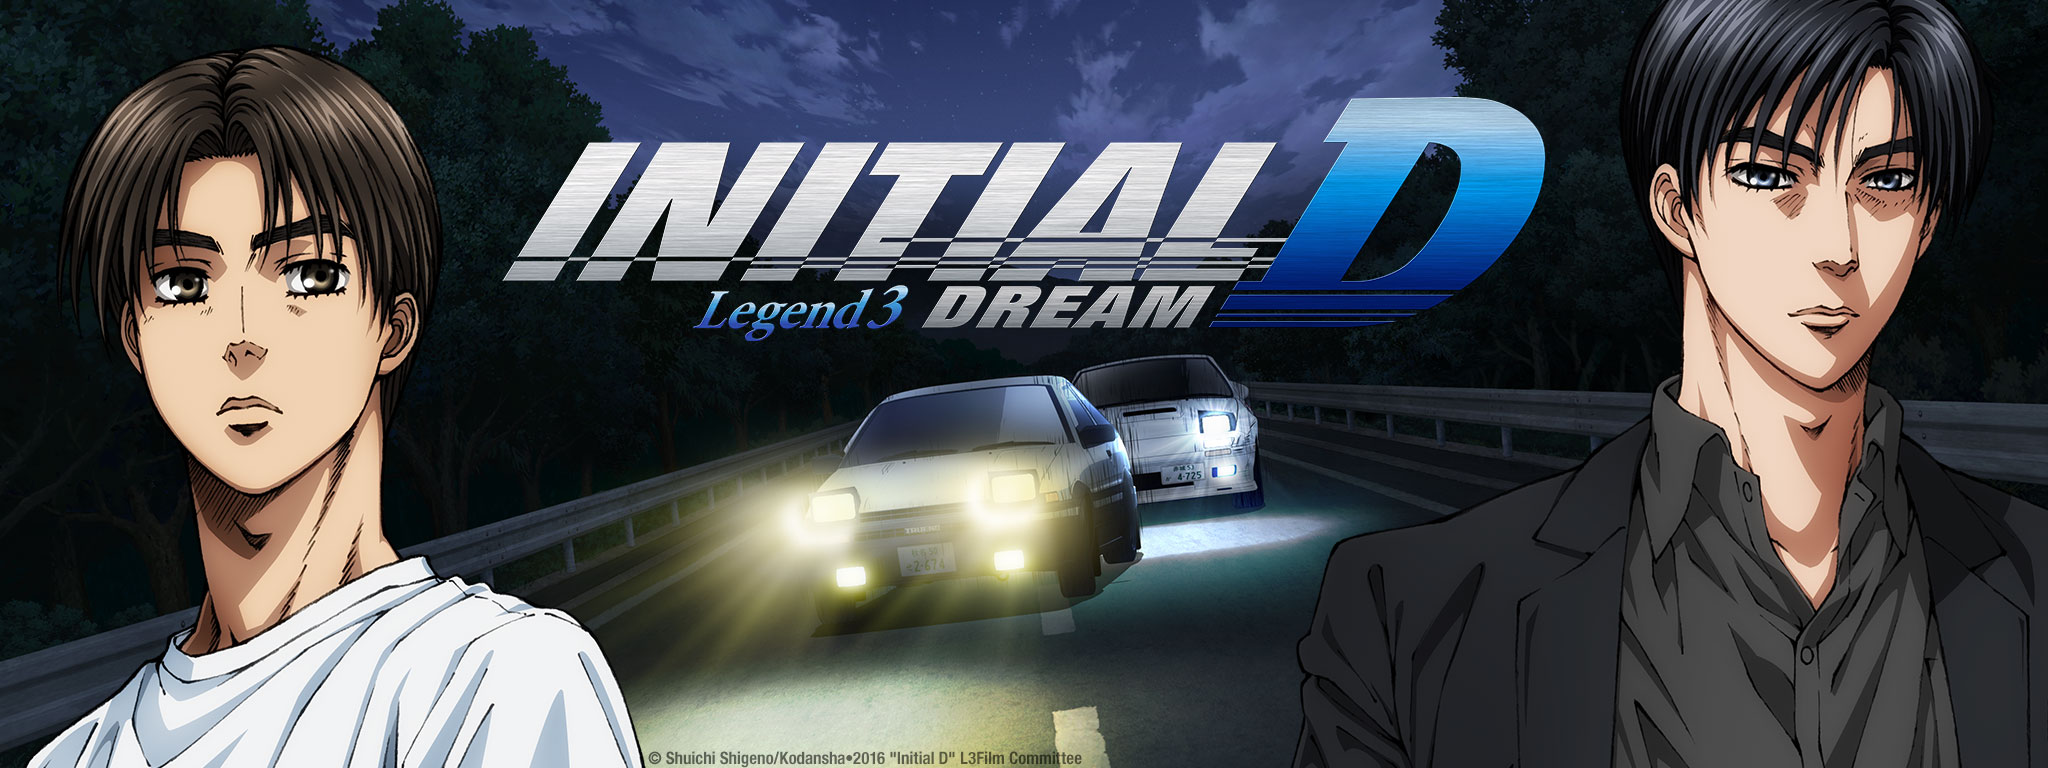 Title Art for New Theatrical Movie Initial D Legend 3: Dream